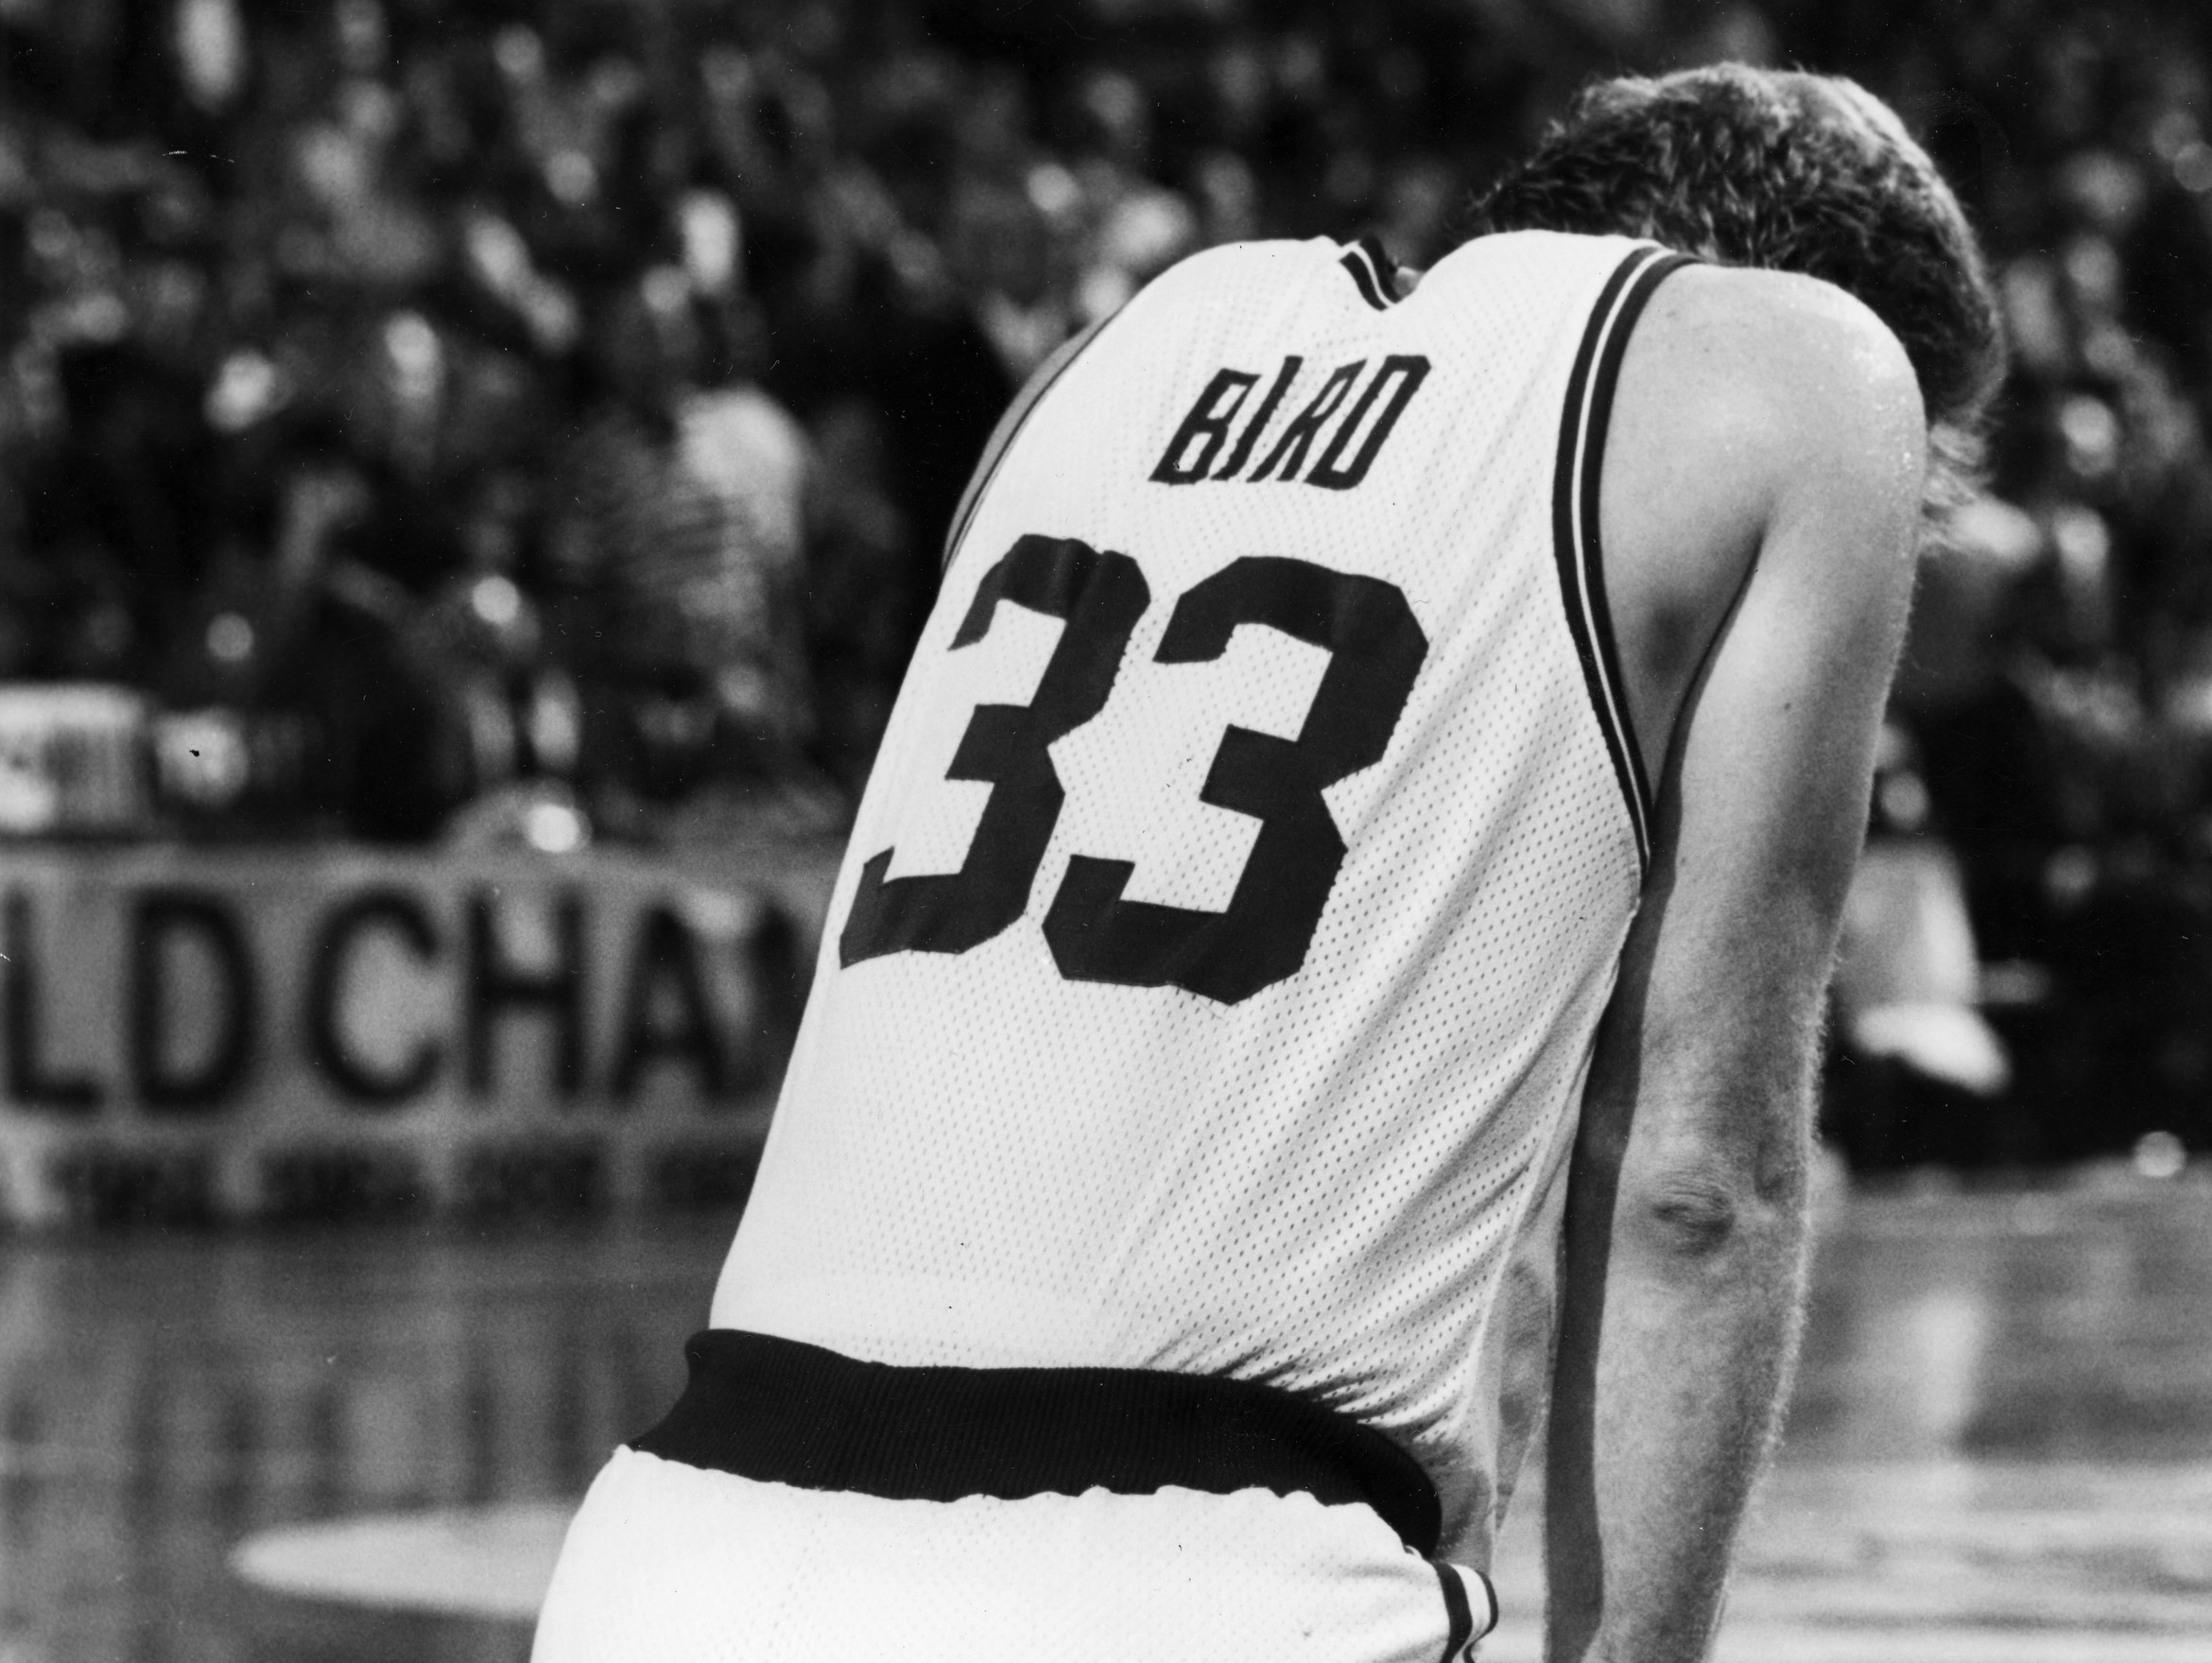 Boston Celtics Larry Bird kneels down after being injured during a game against the Indiana Pacers at the Boston Garden, May 5, 1991.